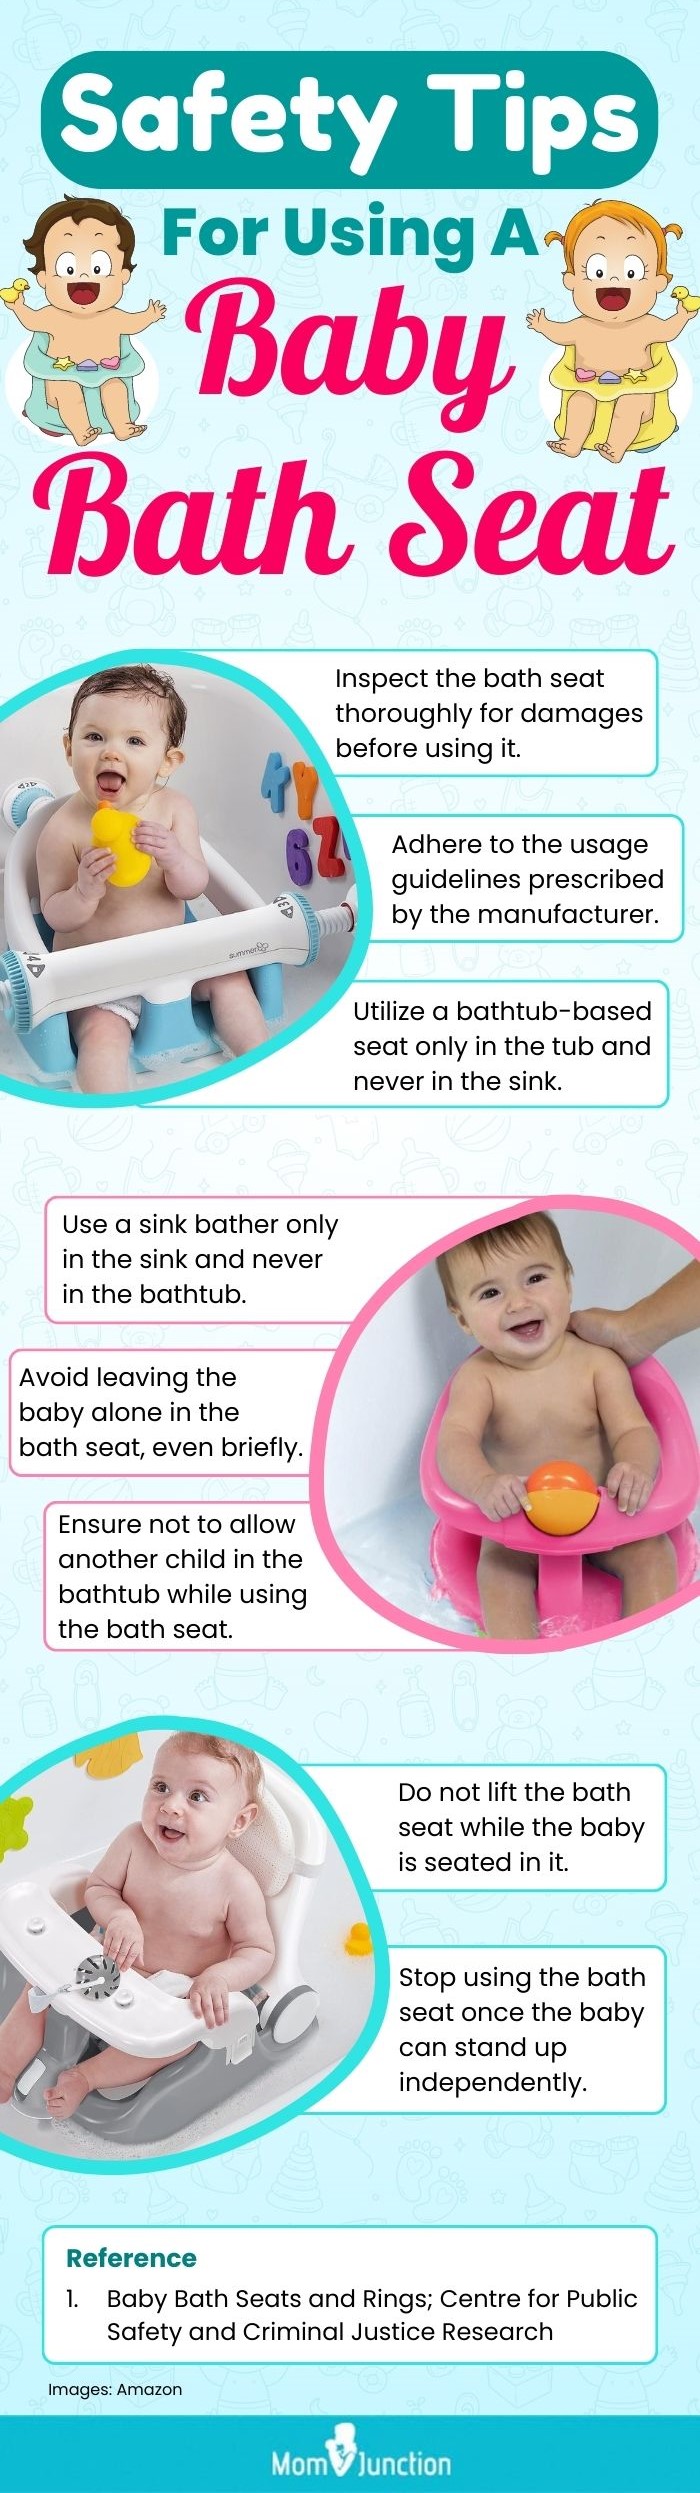 Safety Tips For Using A Baby Bath Seat (infographic)